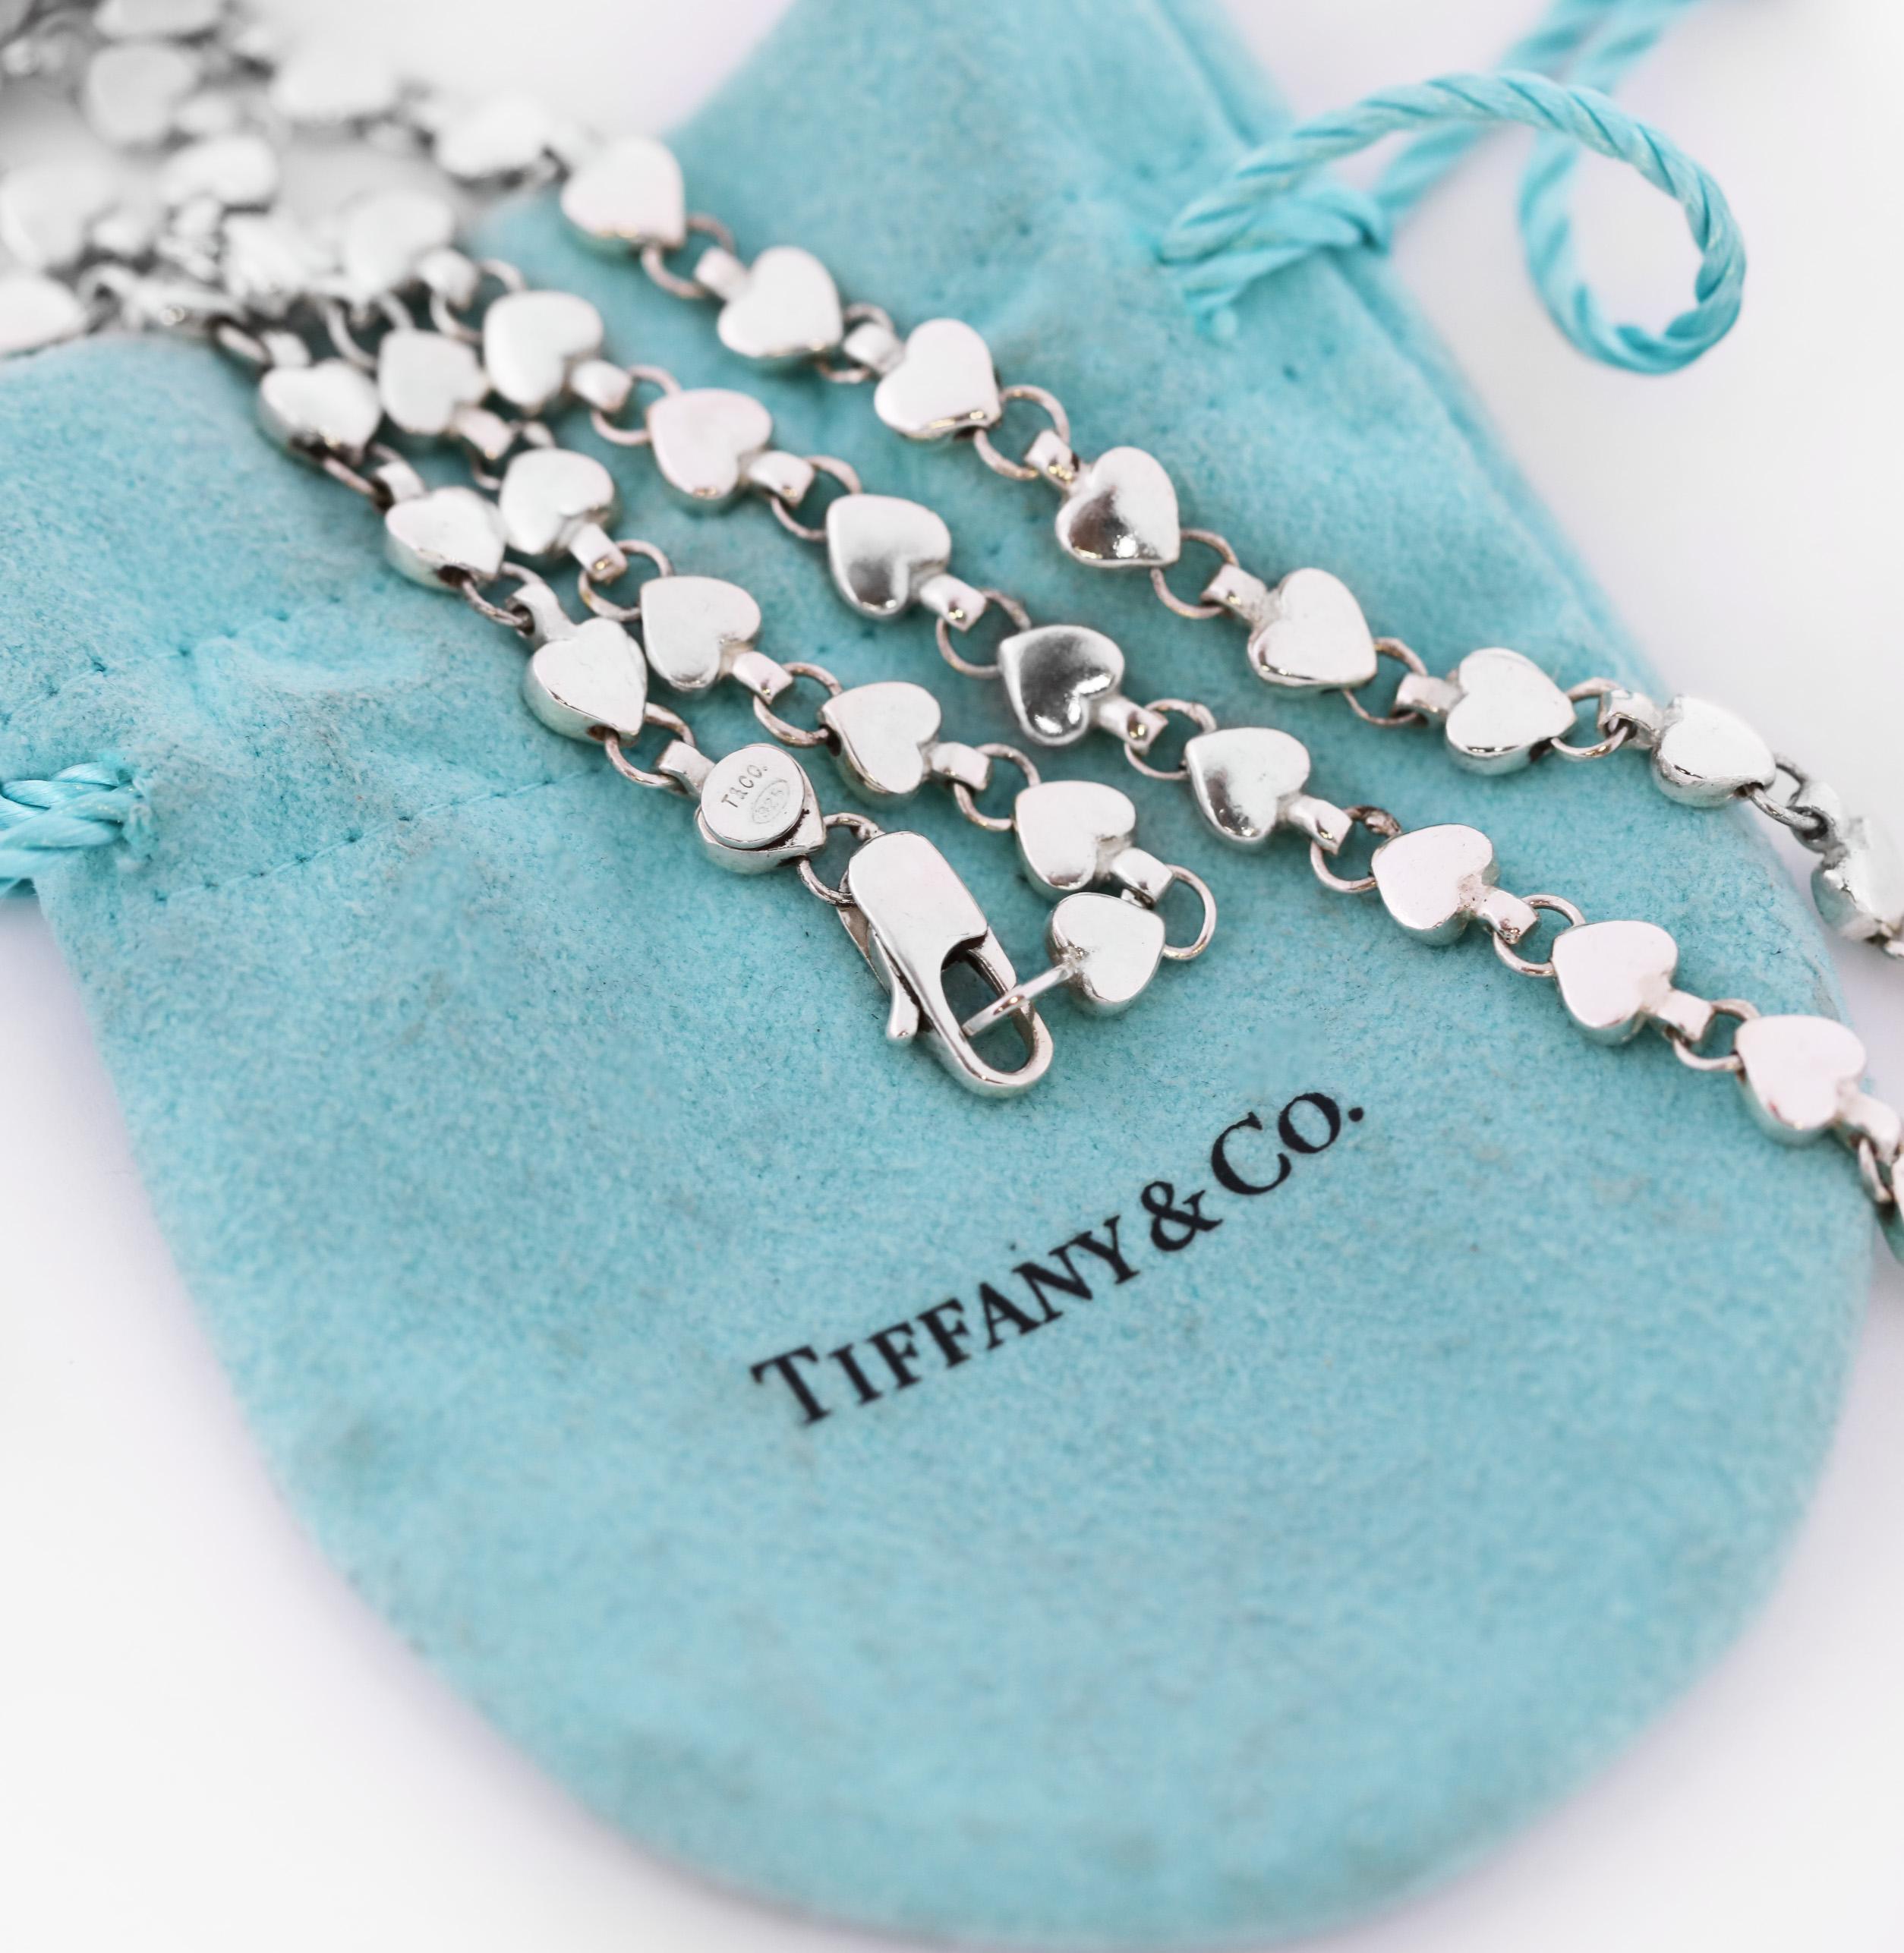 Tiffany & CO.
Vintage Necklace
Approx. 22